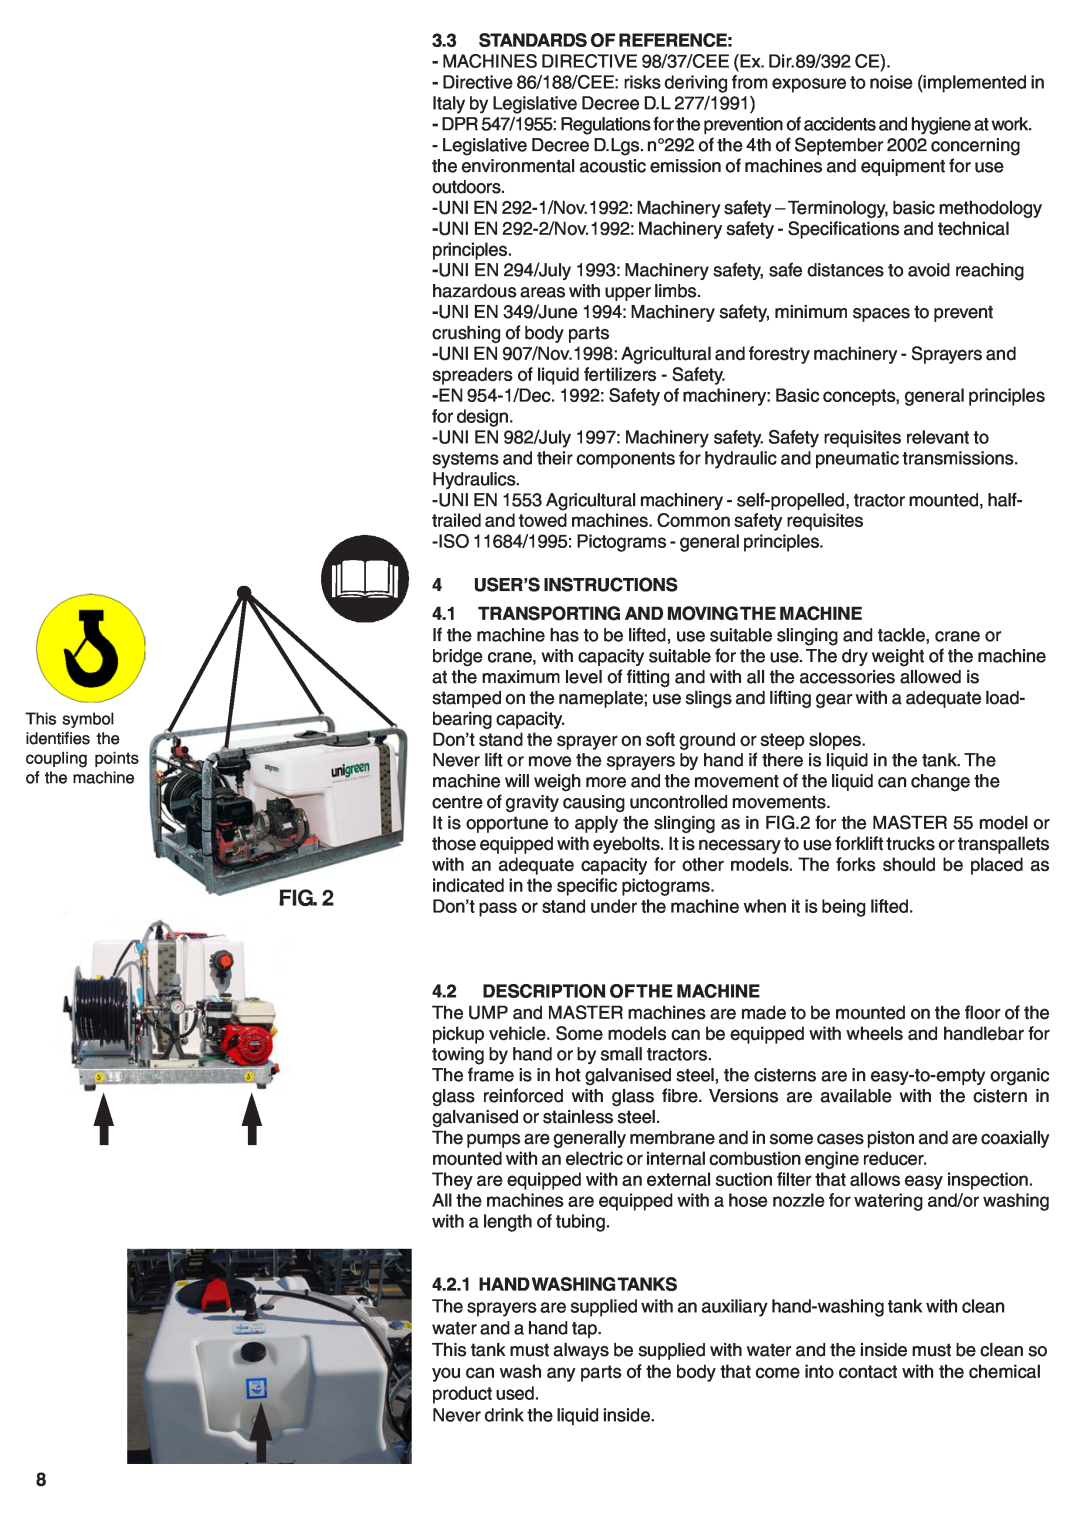 Unigreen 50 Standards Of Reference, User’S Instructions, Transporting And Movingthe Machine, Description Of The Machine 